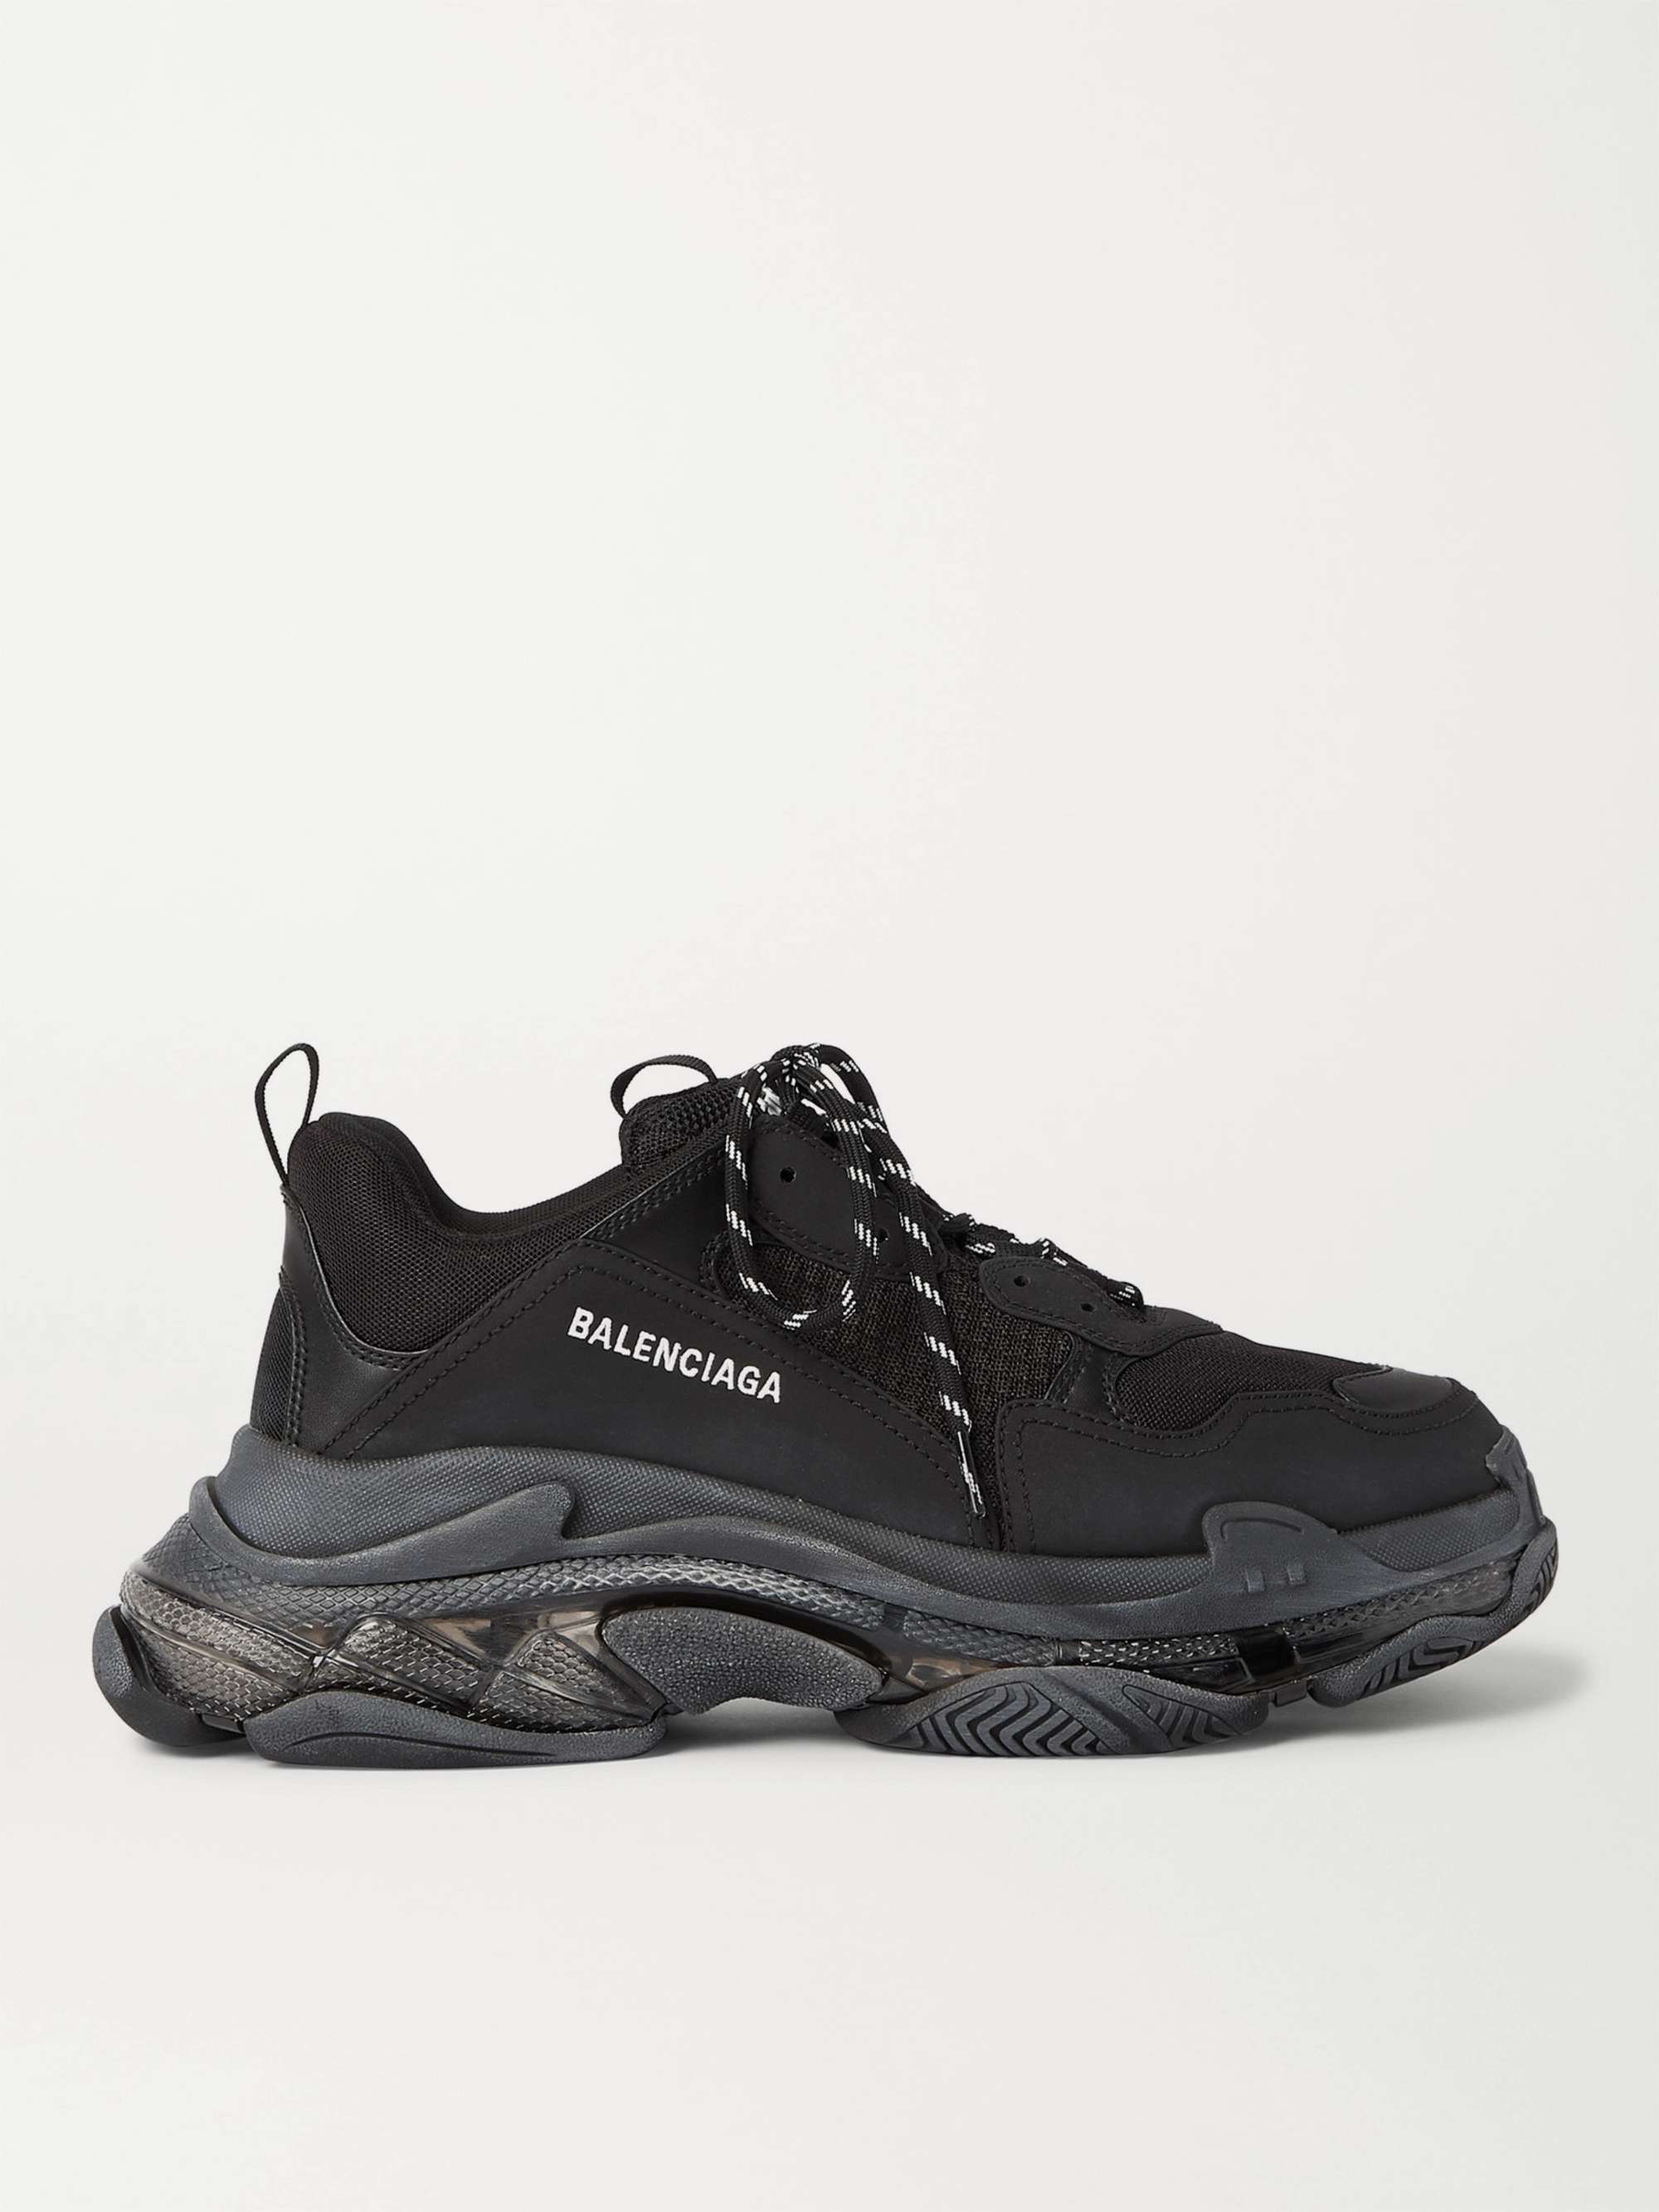 Triple S Clear Sole Mesh, Nubuck and Leather Sneakers